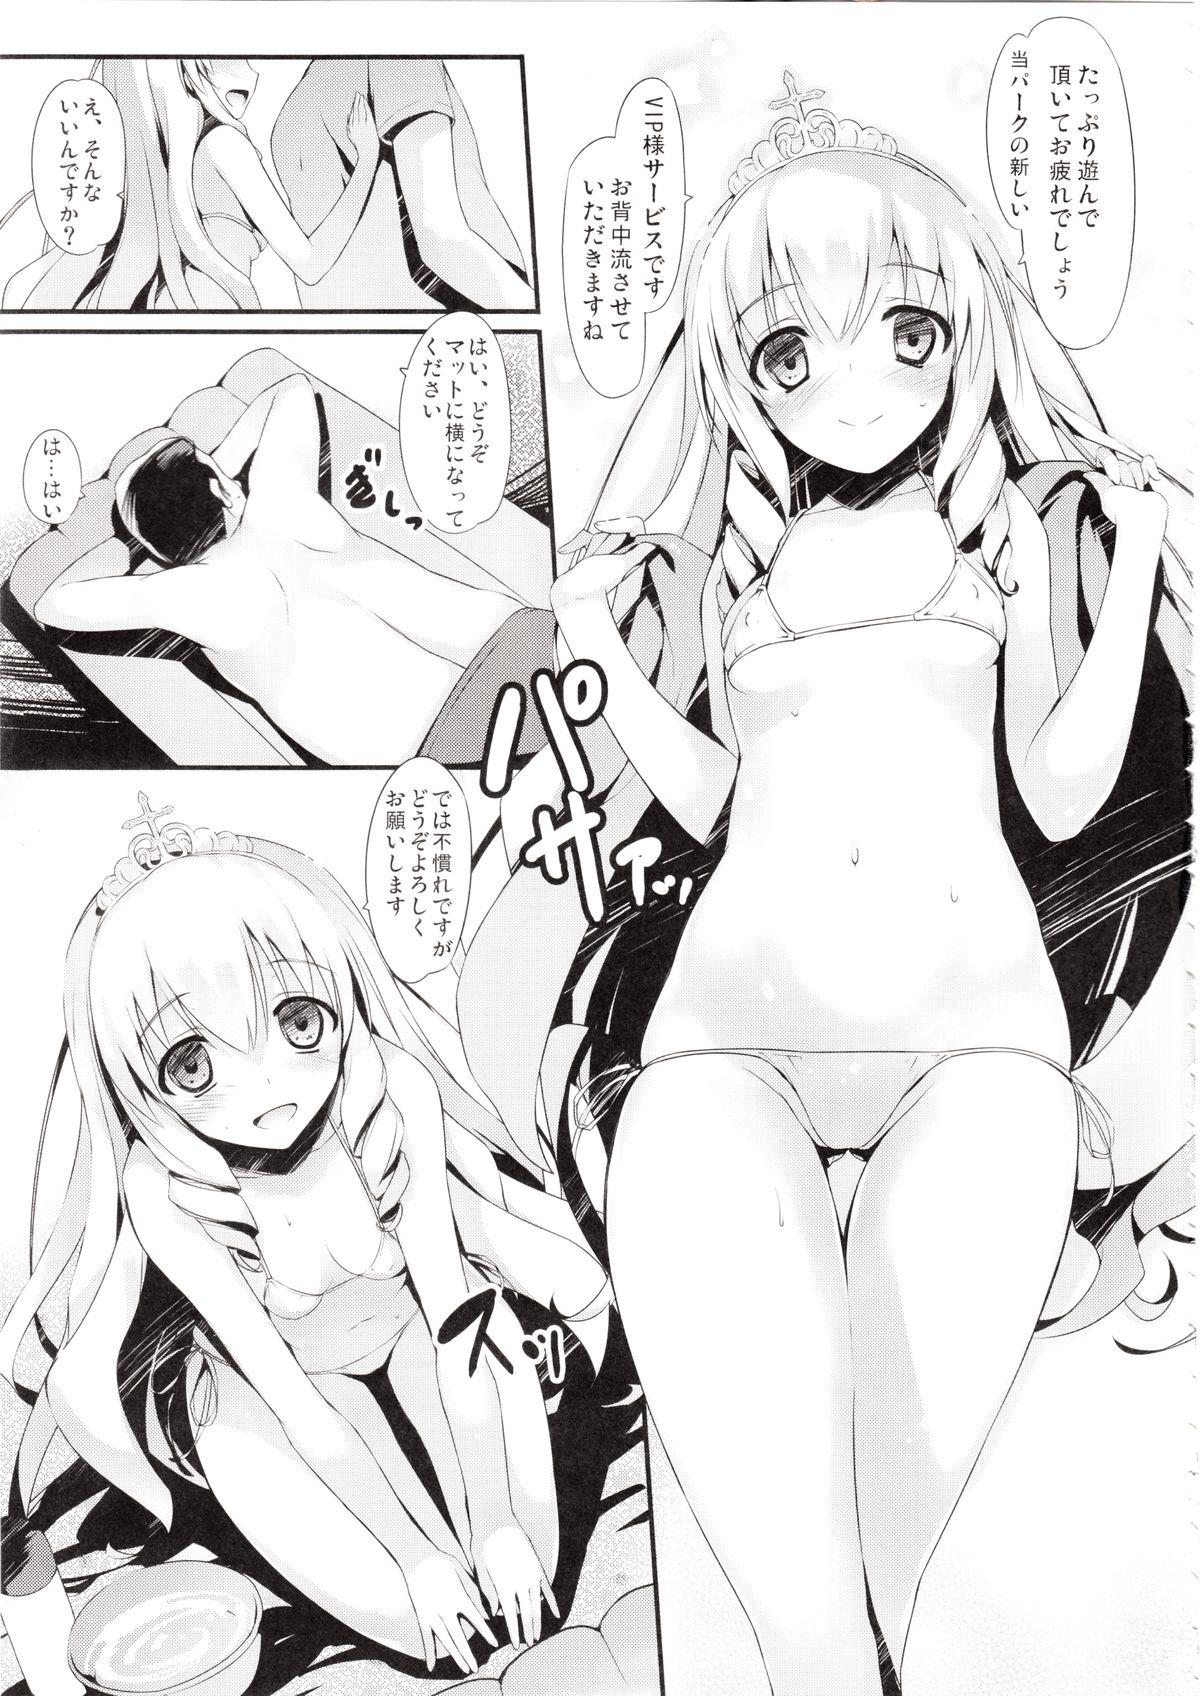 Mature Wellcome to the Sex Park - Amagi brilliant park Women Fucking - Page 5